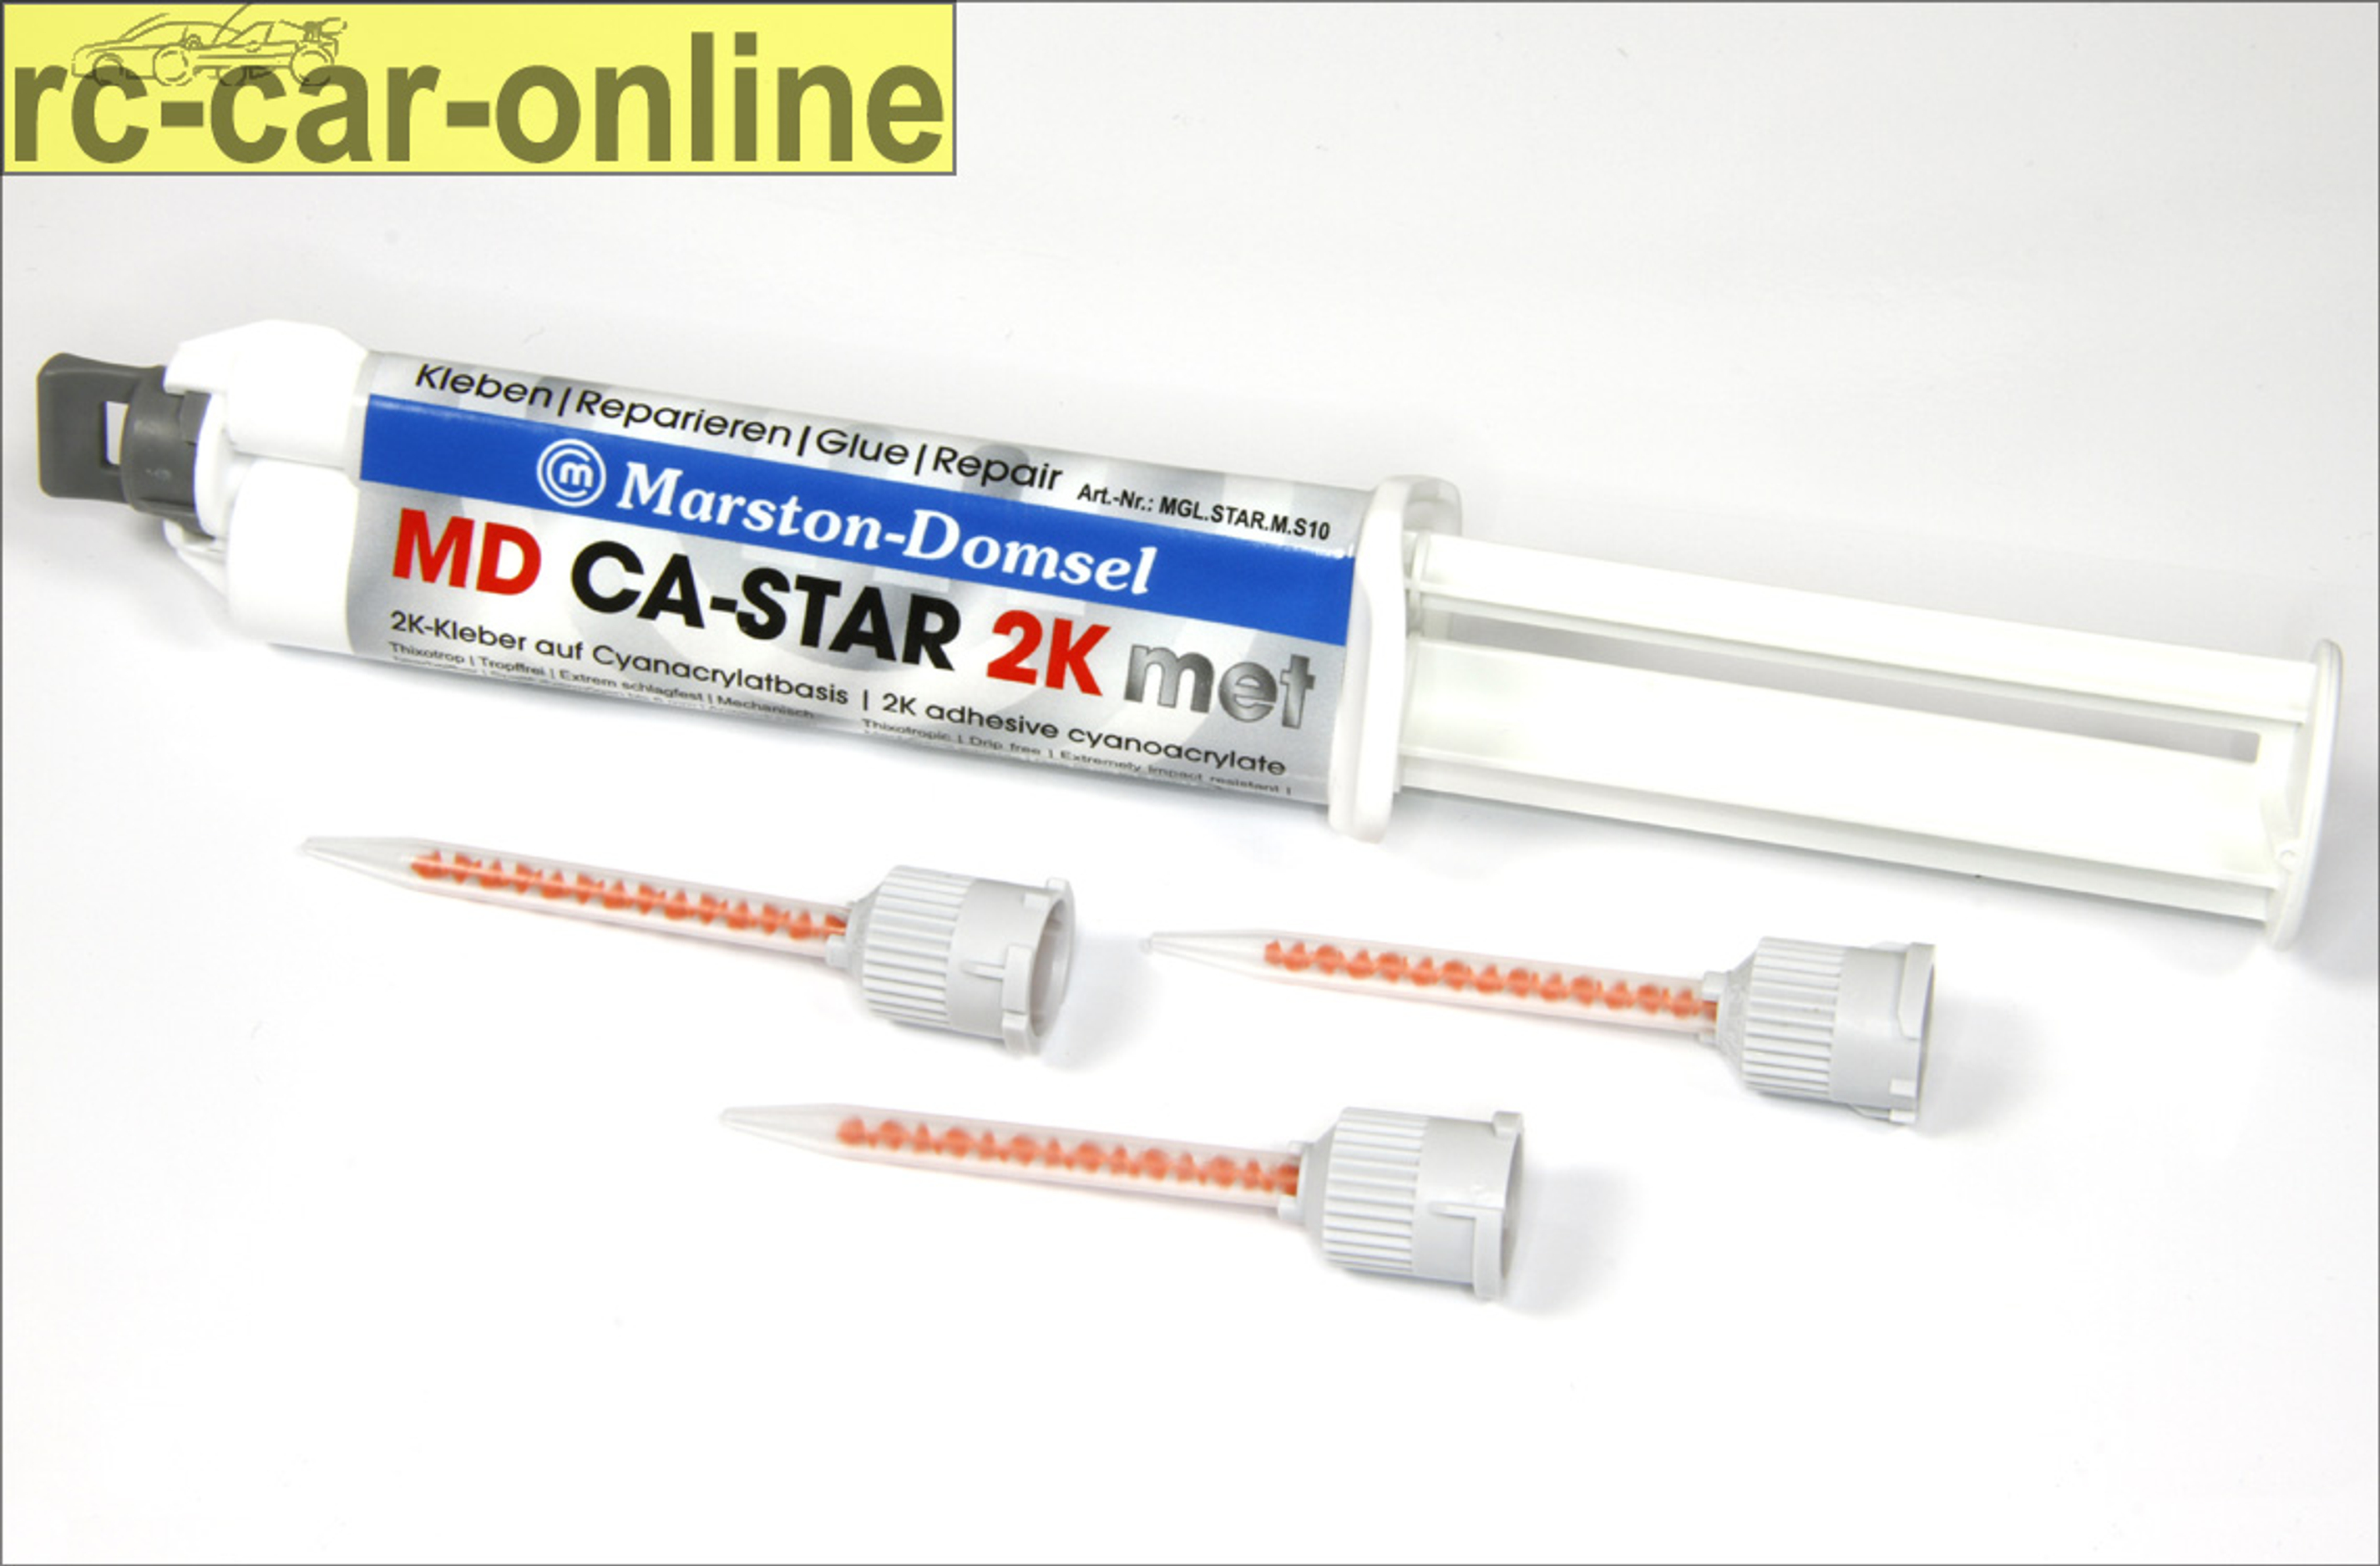 y1360 MD Two-component glue CA-STAR 2K met